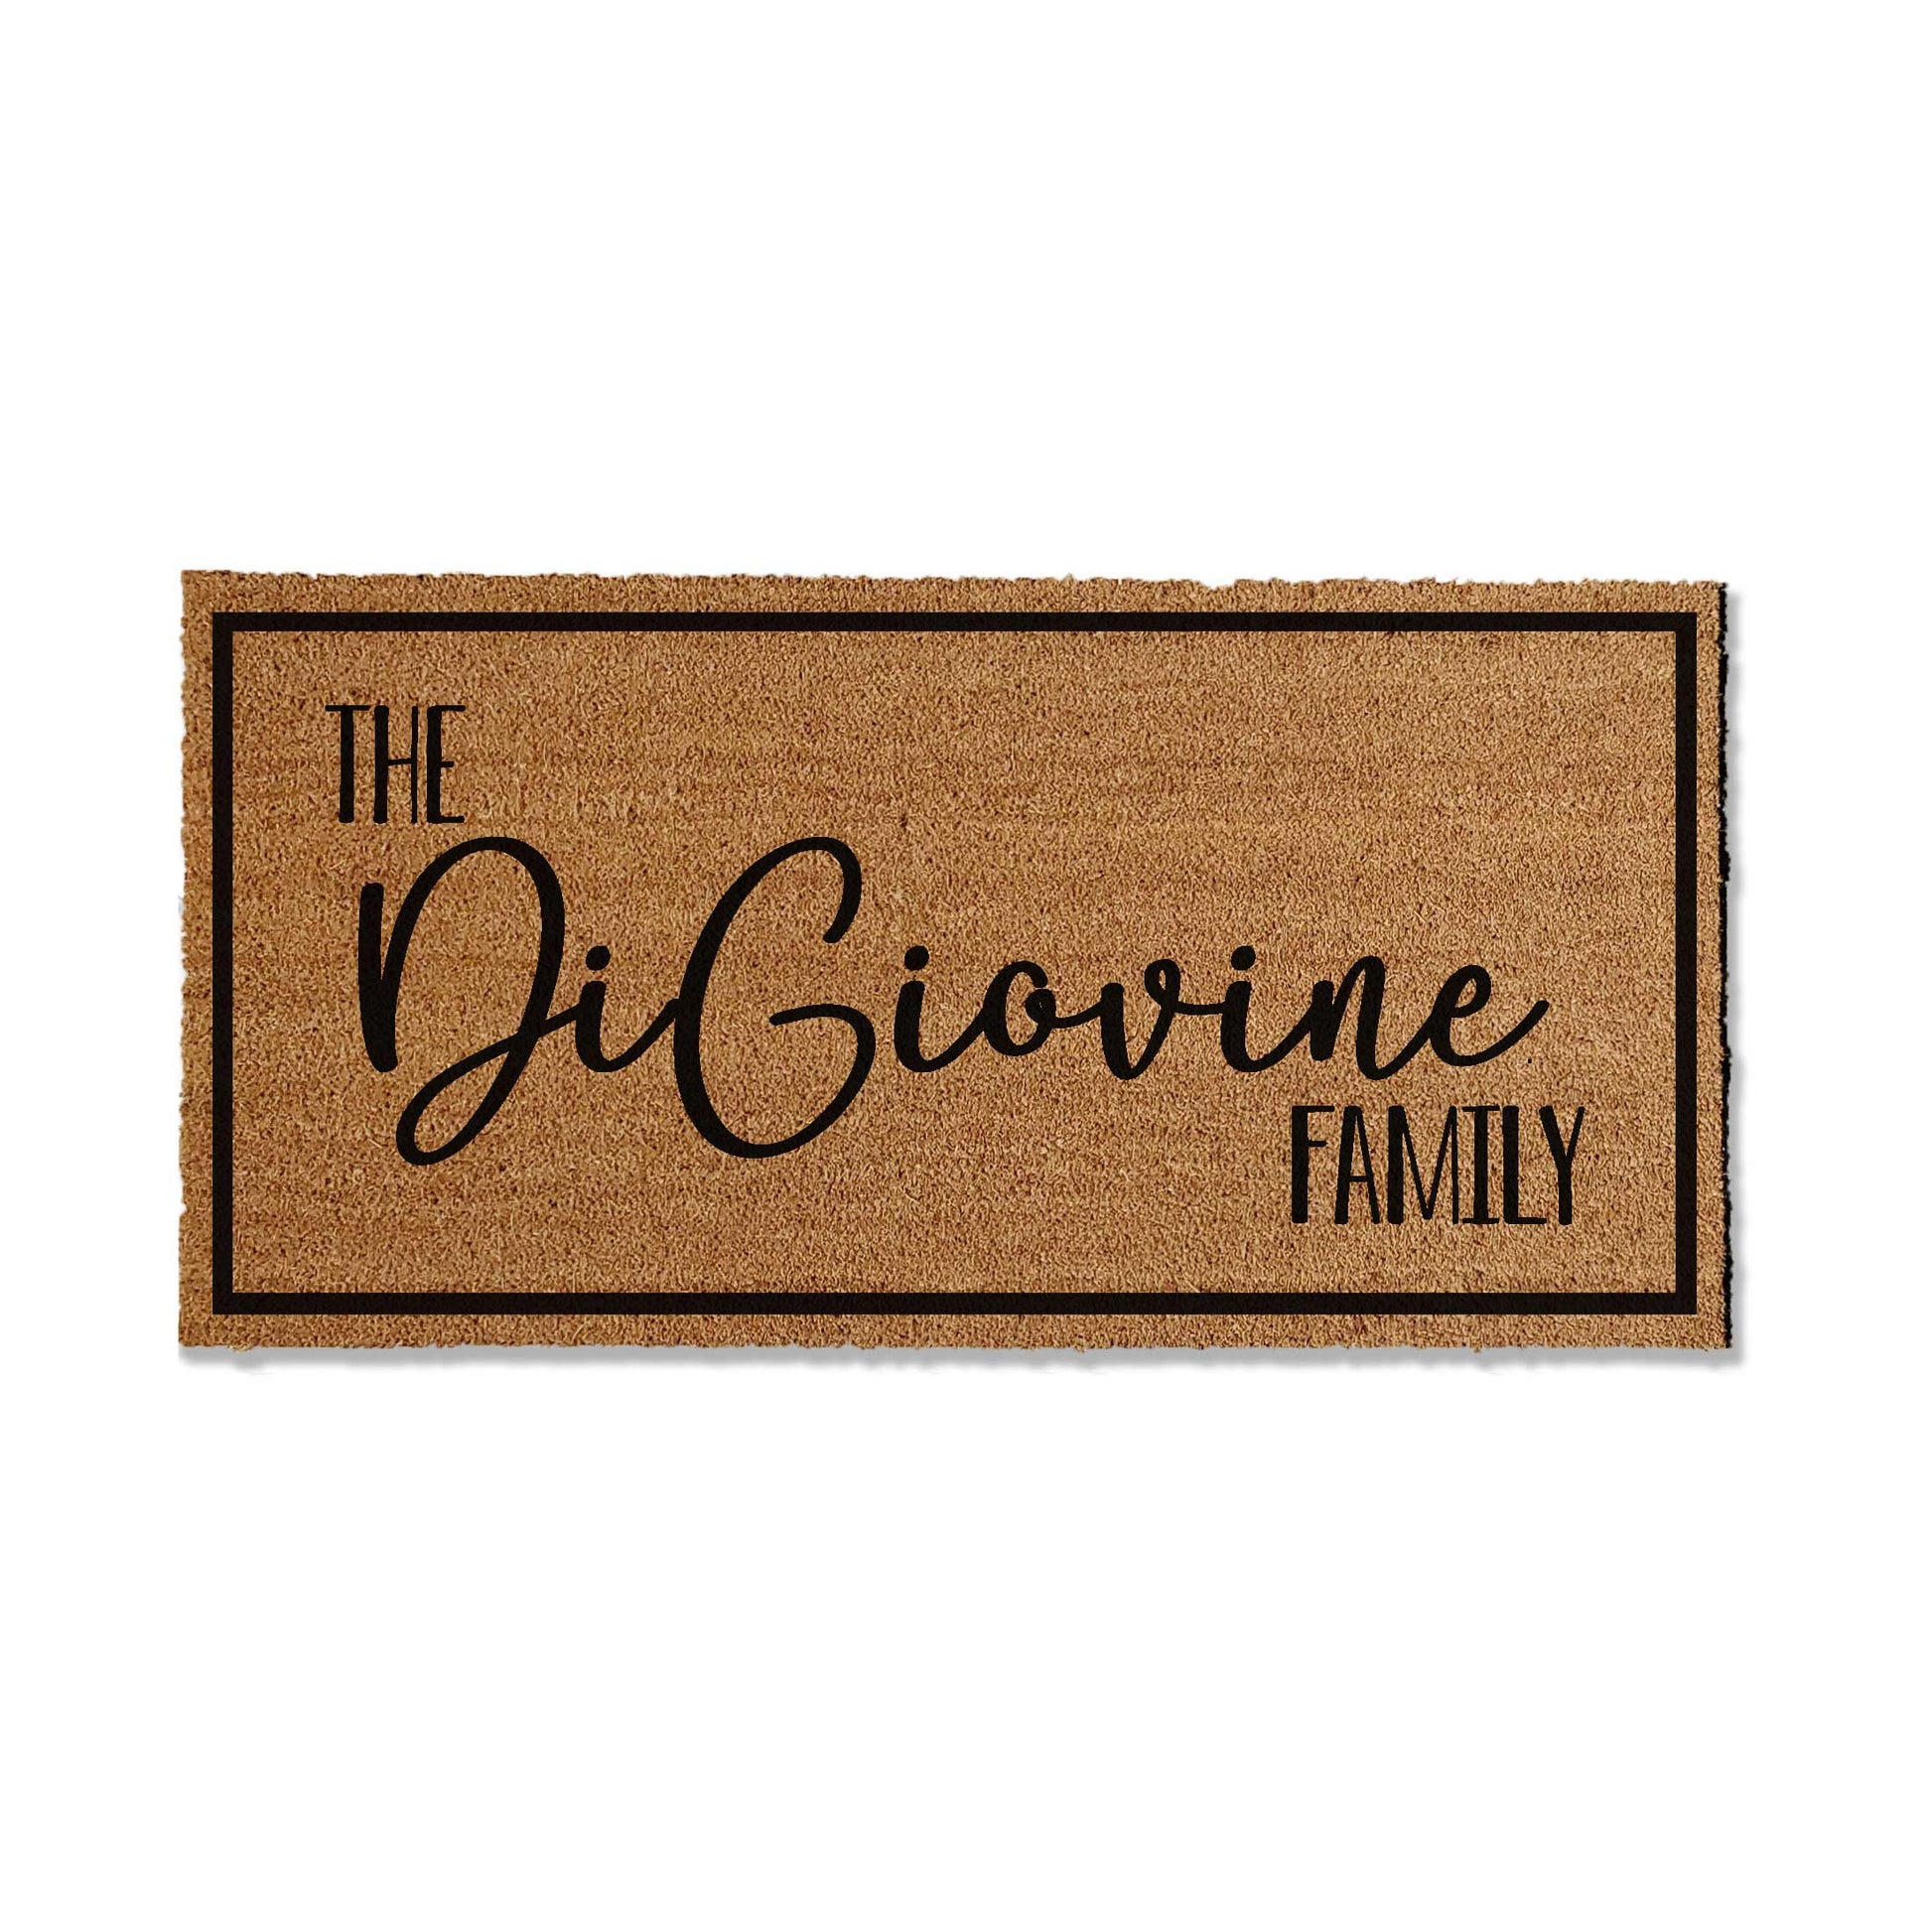 Custom coir doormat measuring 24 inches by 48 inches, featuring a personalized design or message. Made from natural coir fibers for durability and a classic look. Perfect for adding a welcoming touch to your entryway.